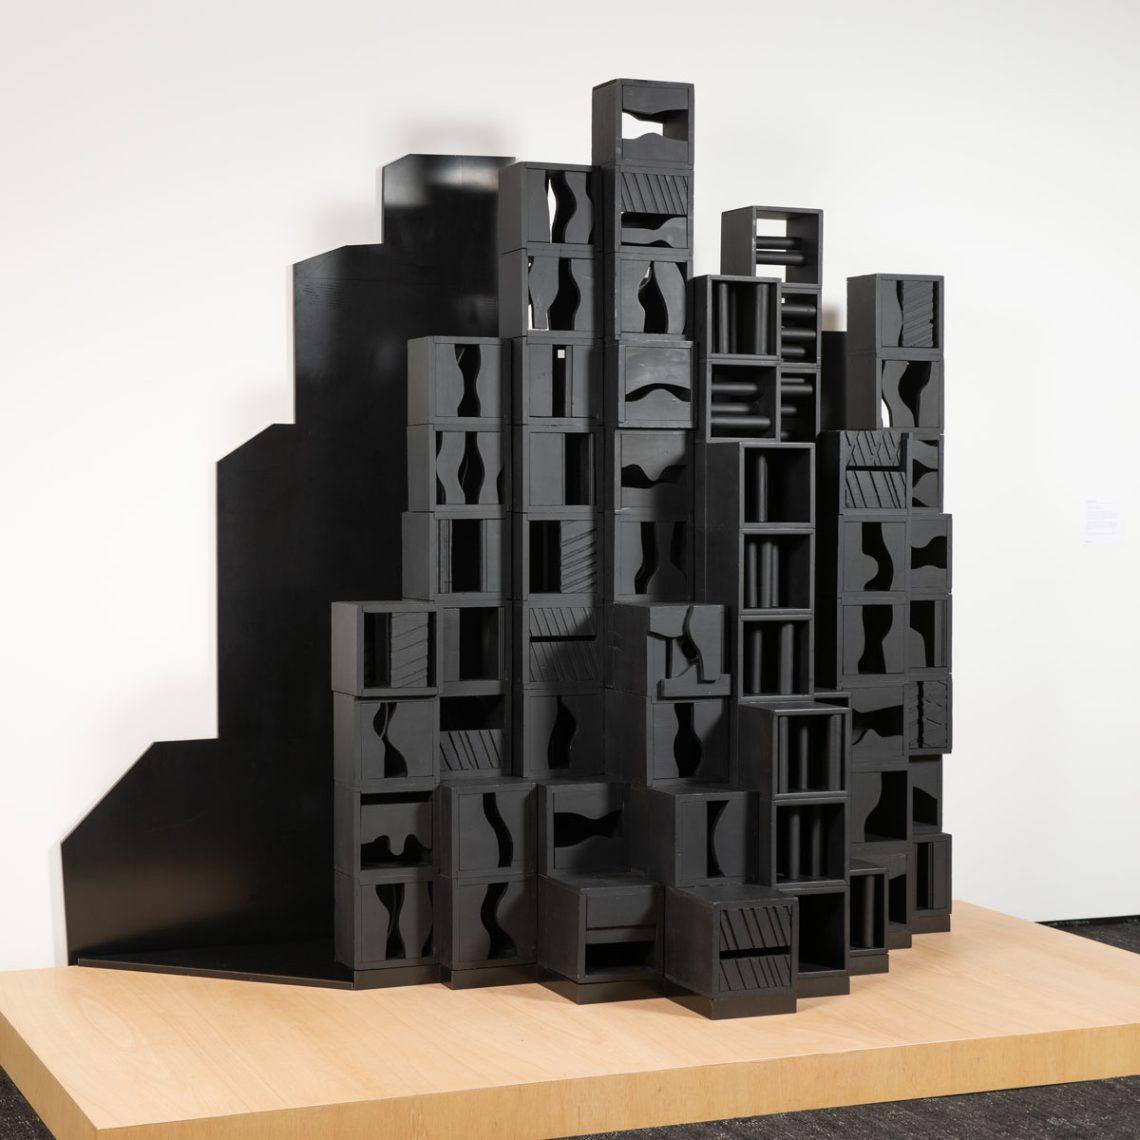 Boca Raton Museum of Art Restores Sculpture by Pioneering Artist Louise Nevelson with Grant from Bank of America Art Conservation Project